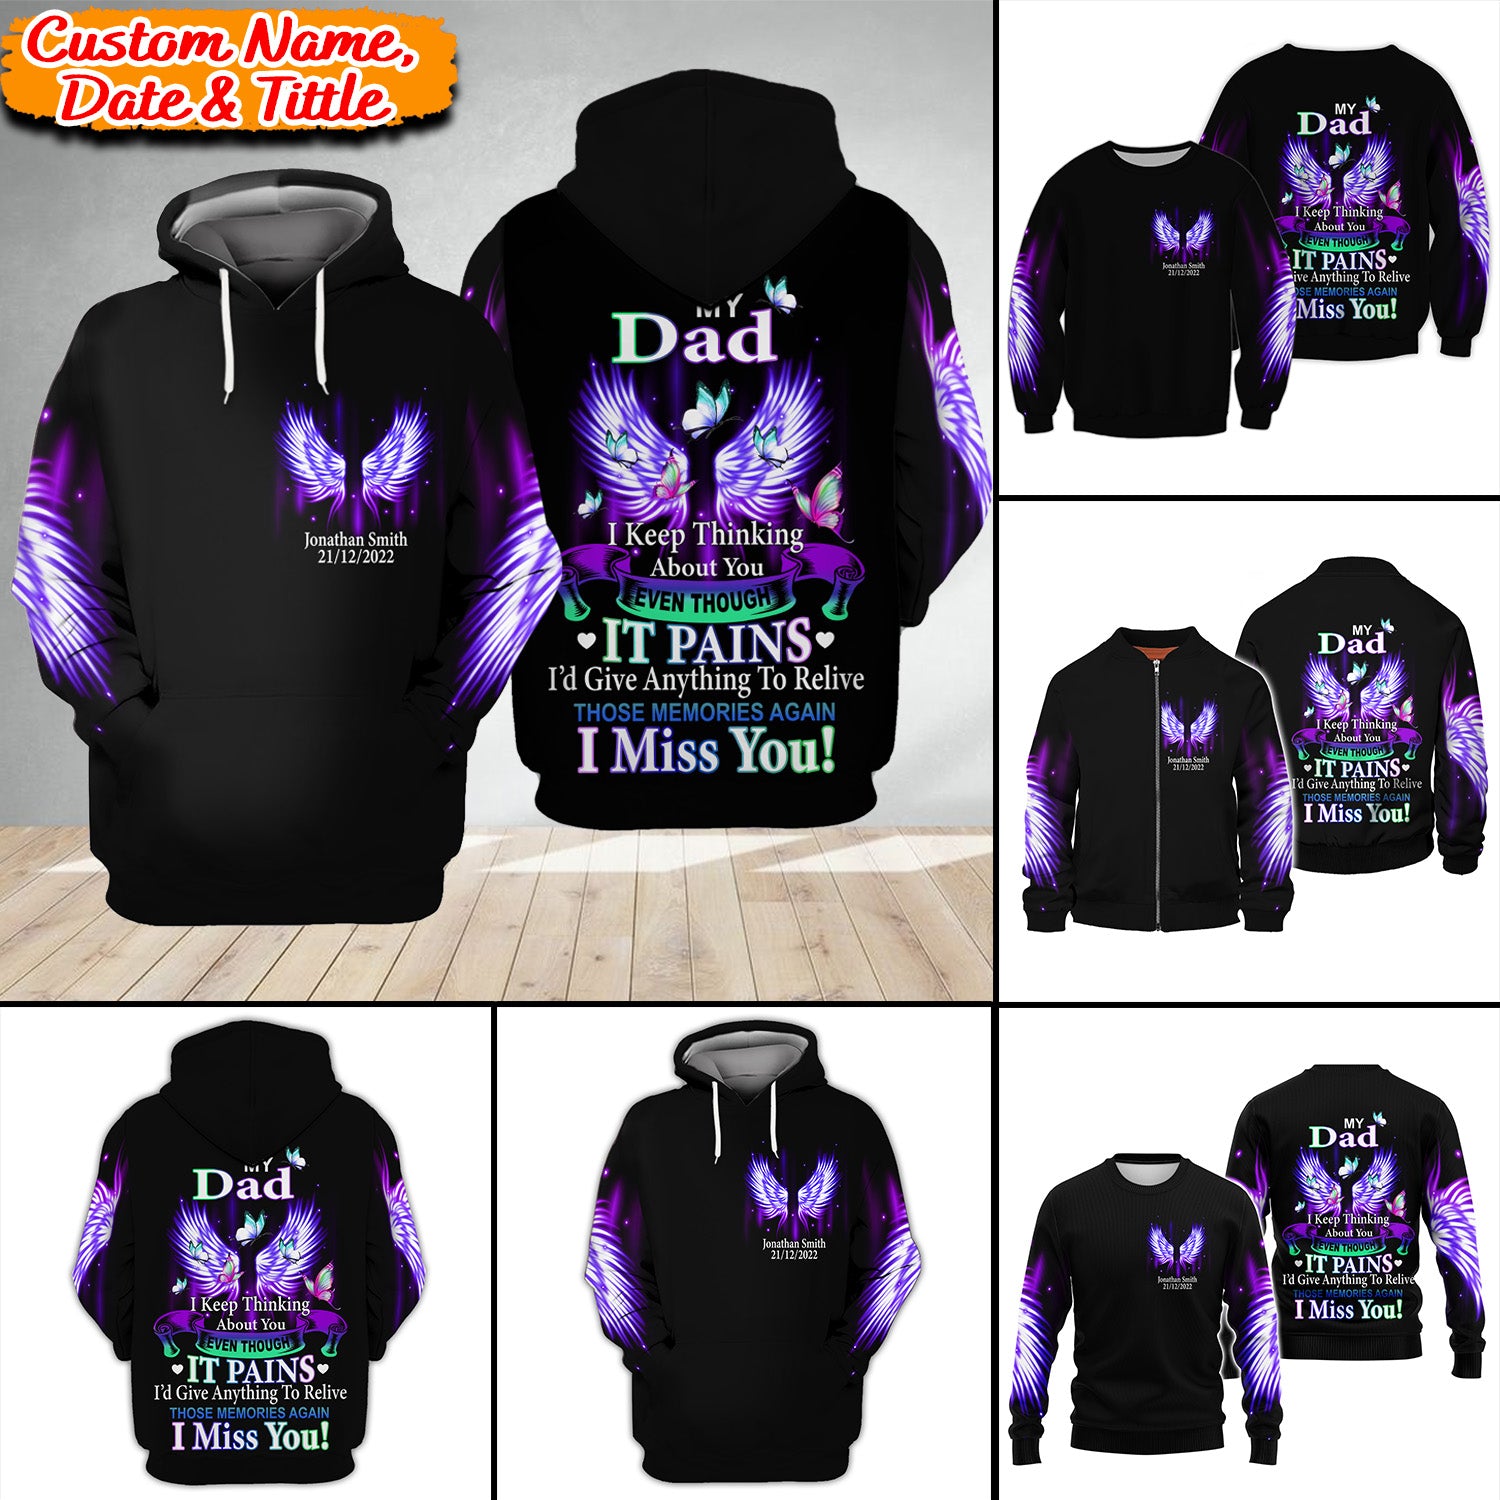 I Keep Thinking About You Even Though It Pains, I Miss You - Custom Name, Date And Title - Personalized Halloween 3D Shirt, Memorial Gift